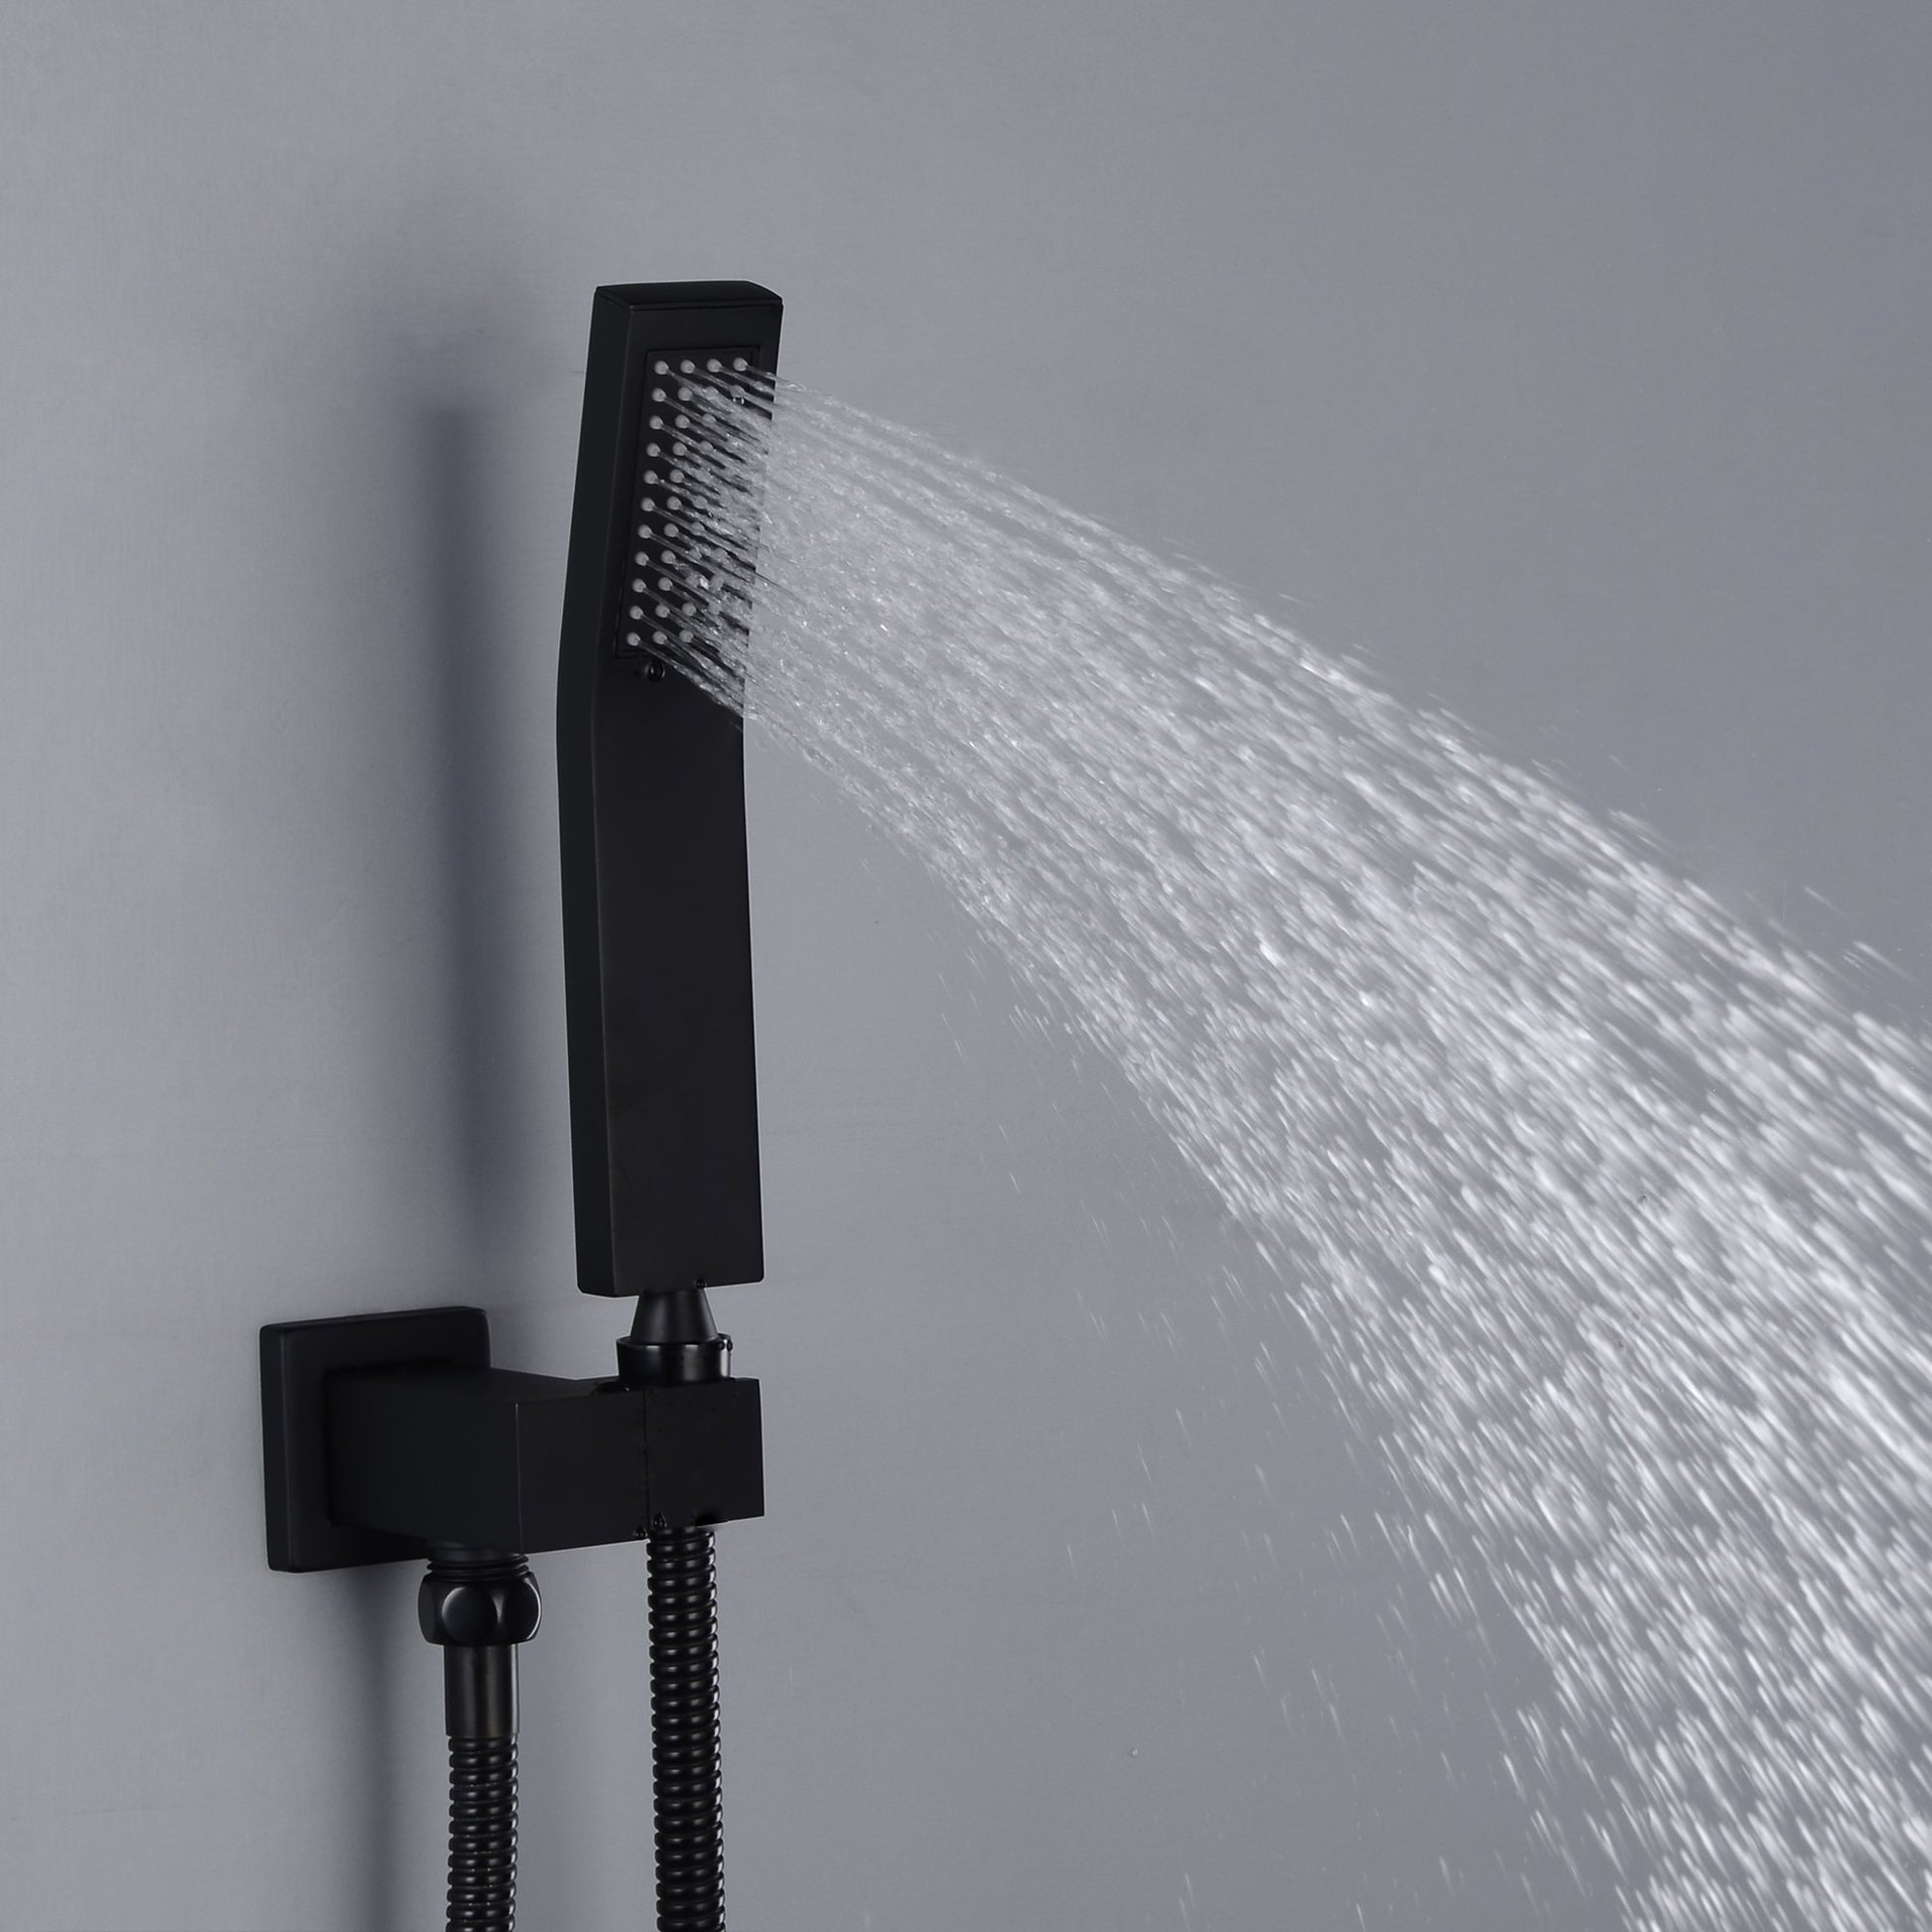 1-Spray Patterns with 2.66 GPM 10 in. Wall Mount Dual Shower Heads with Rough-In Valve Body and Trim in Matte Black - Alipuinc